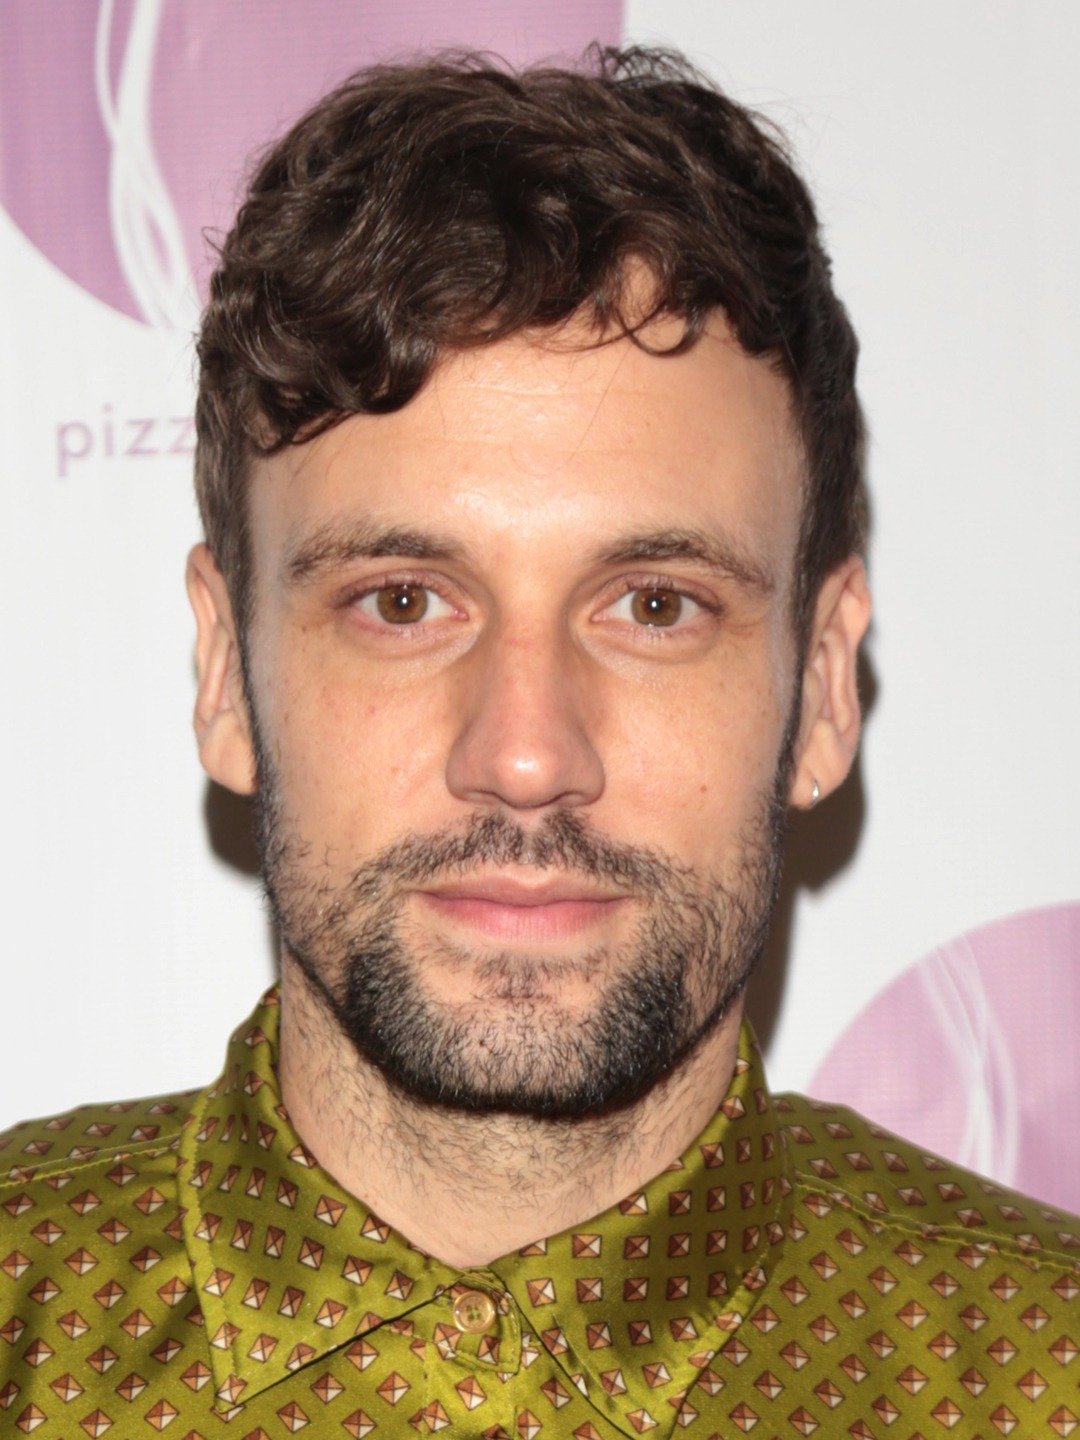 How tall is Nick Blood?